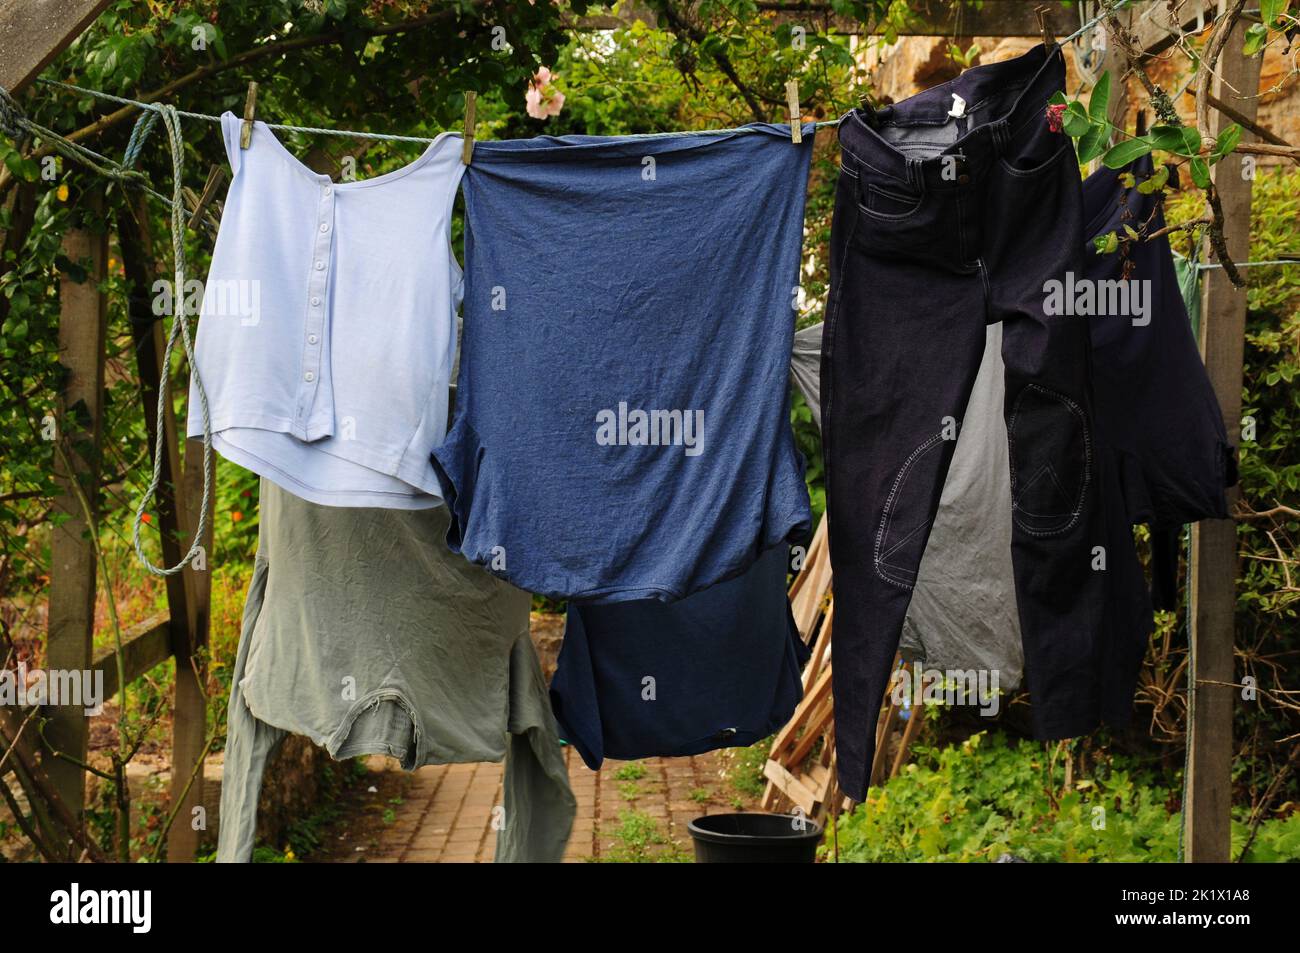 Washed clothes drying outside on washing line Stock Photo